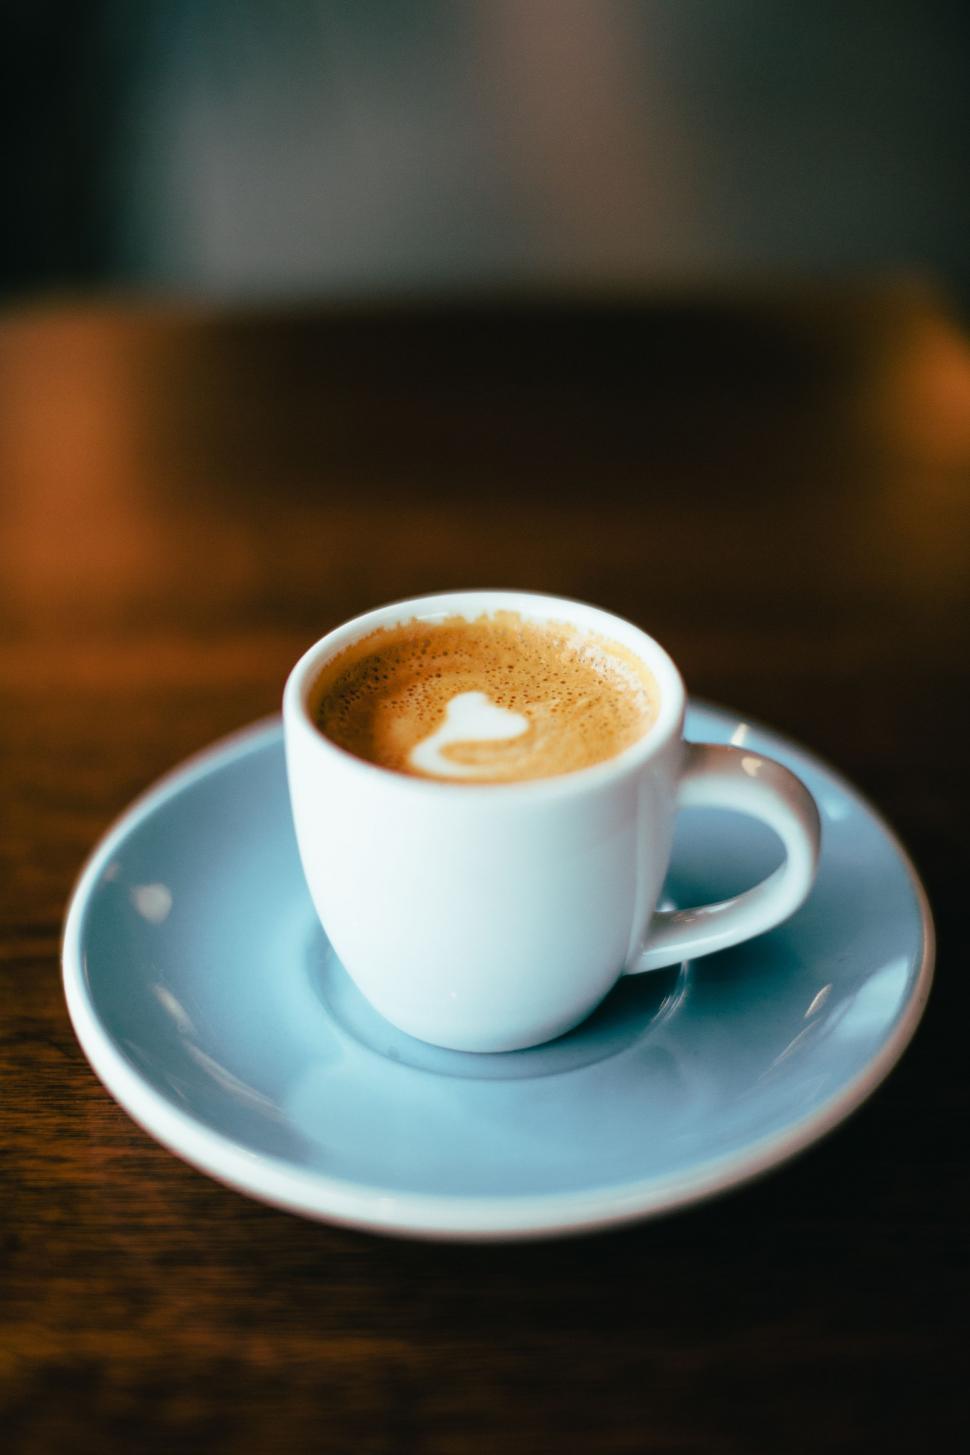 Free Image of Cup of Coffee on Saucer 